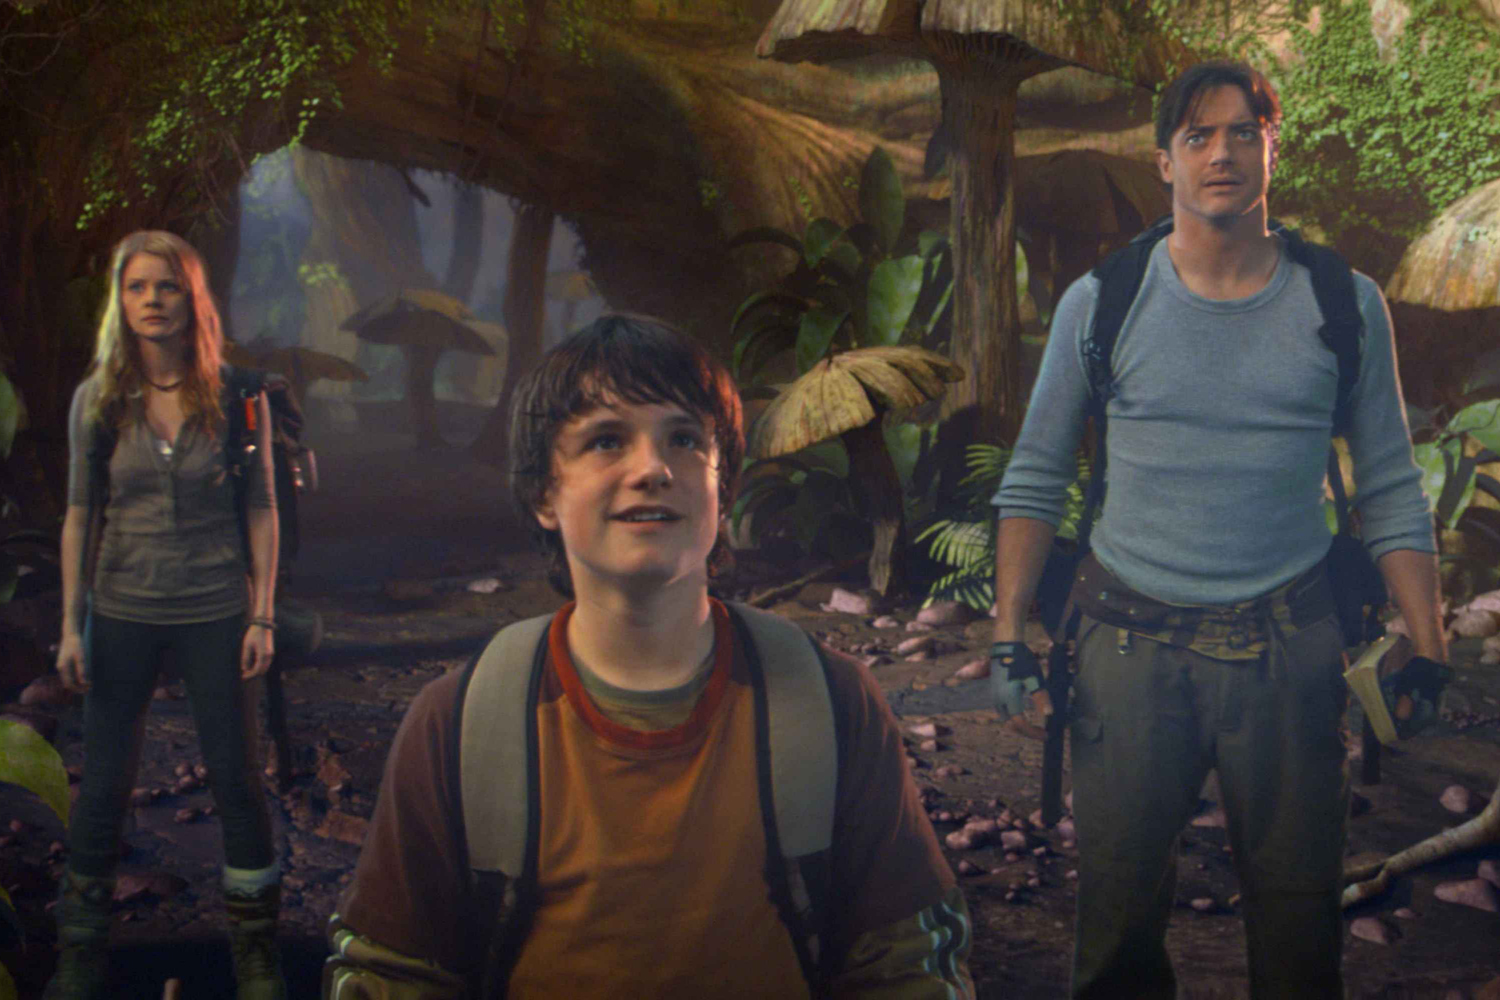 (left to right) Anita Briem stars as ÒHannahÓ, Josh Hutcherson stars as ÒSeanÓ and Brendan Fraser stars as ÒTrevorÓ in New Line CinemaÕs release of Eric BrevigÕs JOURNEY TO THE CENTER OF THE EARTH. PHOTOGRAPHS TO BE USED SOLELY FOR ADVERTISING, PROMOTION, PUBLICITY OR REVIEWS OF THIS SPECIFIC MOTION PICTURE AND TO REMAIN THE PROPERTY OF THE STUDIO. NOT FOR SALE OR REDISTRIBUTION.